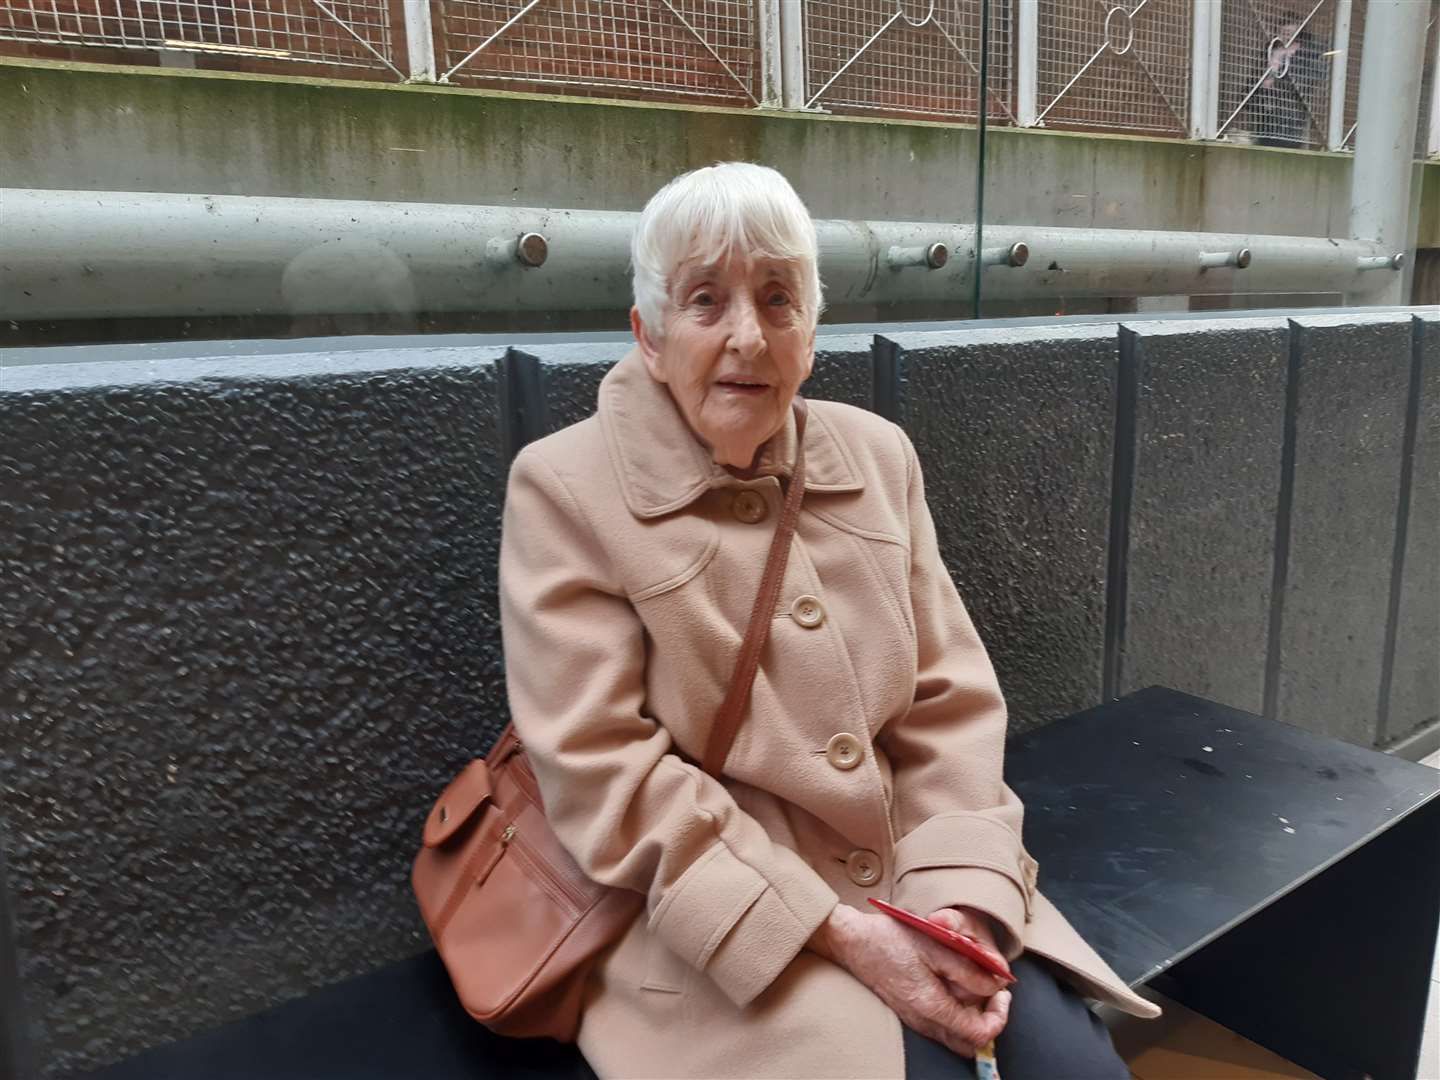 Enid Mechan, from Coxheath, often sits in the station waiting for her bus